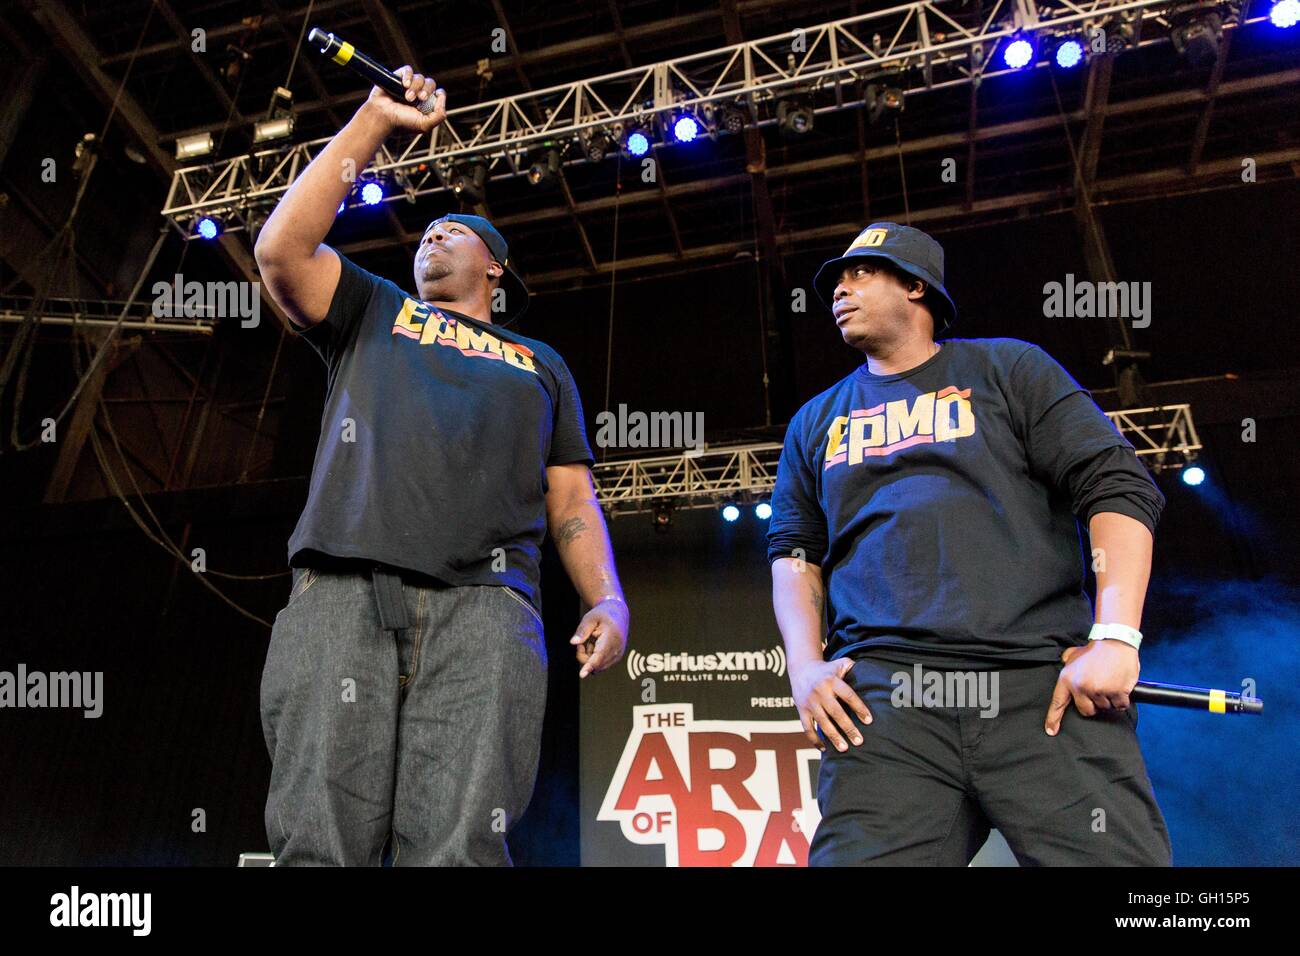 Tinley Park, Illinois, USA. 5th Aug, 2016. ERICK SERMON and PARRISH SMITH of EPMD perform live at Hollywood Casino Amphitheater during the Art of Rap Festival in Tinley Park, Illinois © Daniel DeSlover/ZUMA Wire/Alamy Live News Stock Photo